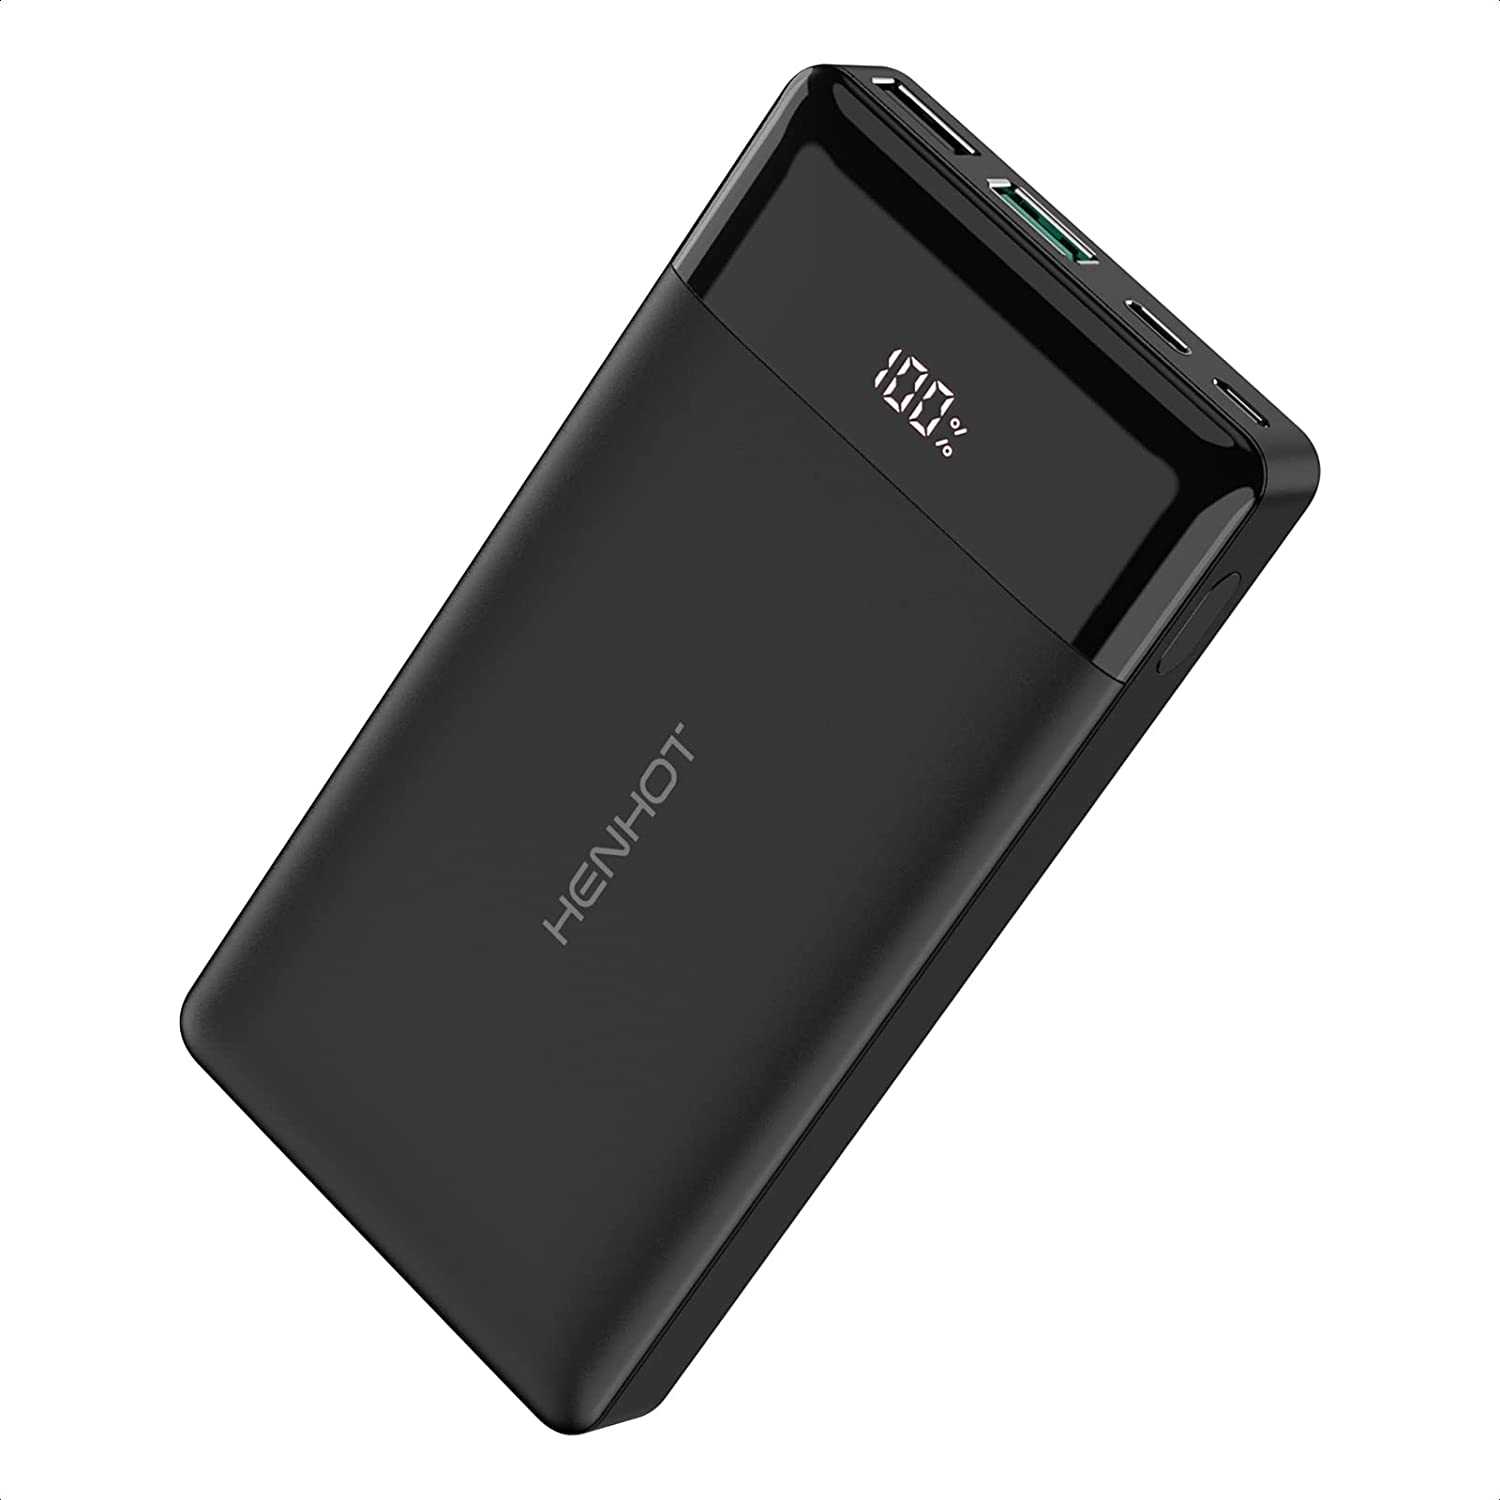 HenHot Portable Charger – 20W USB C Power Bank 15000mAh Fast Charging LCD Display 4 Ports External Battery Pack Portable Phone Charger for iPhone 14/13/12 Pro Max, Galaxy S22/S21, Google iPad Tablet